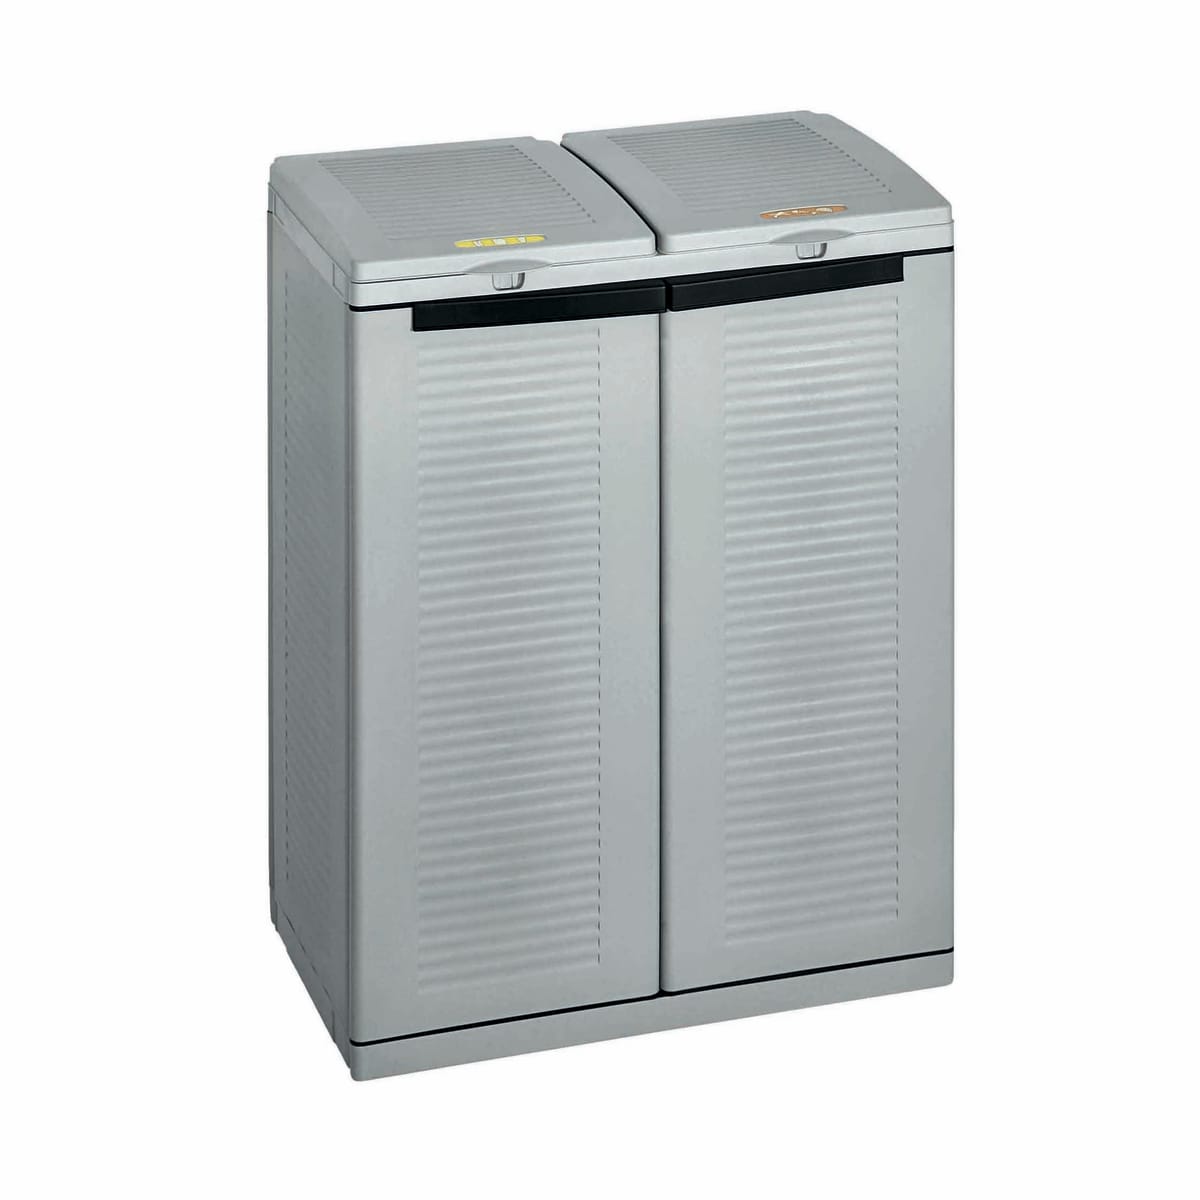 ECOLINE 2 GREY RESIN RECYCLING CABINET W68XP39XH88,7